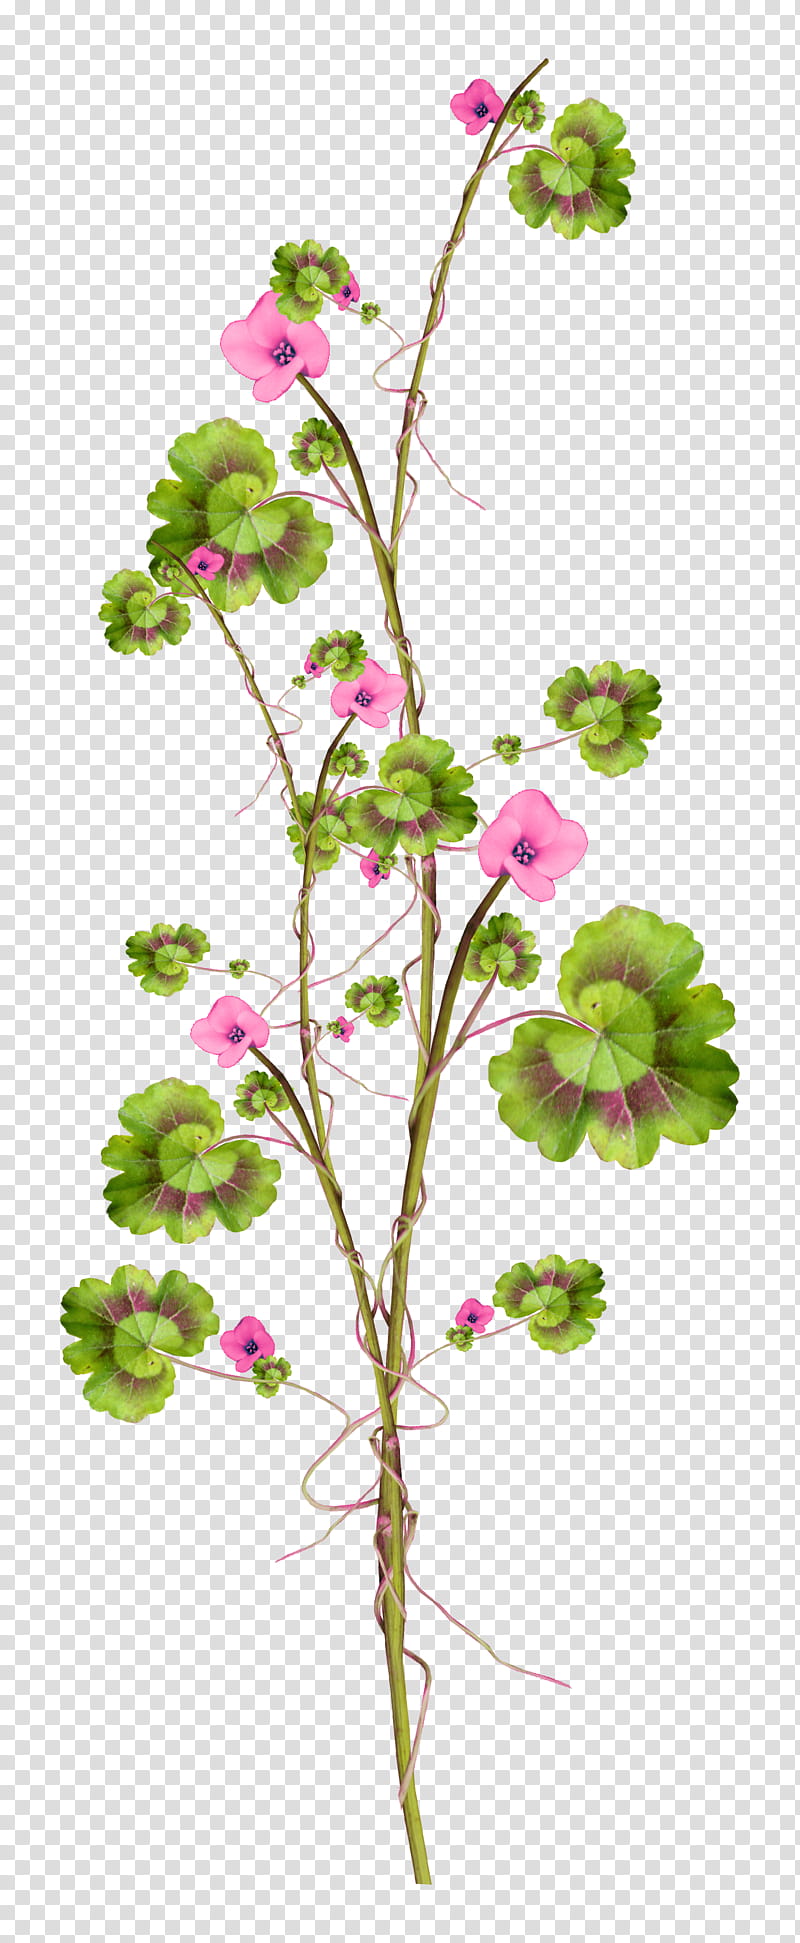 Rose Flower Drawing, Cathedral Of Christ The Saviour, Leaf, Cartoon, Silhouette, Twig, Plant, Japanese Anemone transparent background PNG clipart